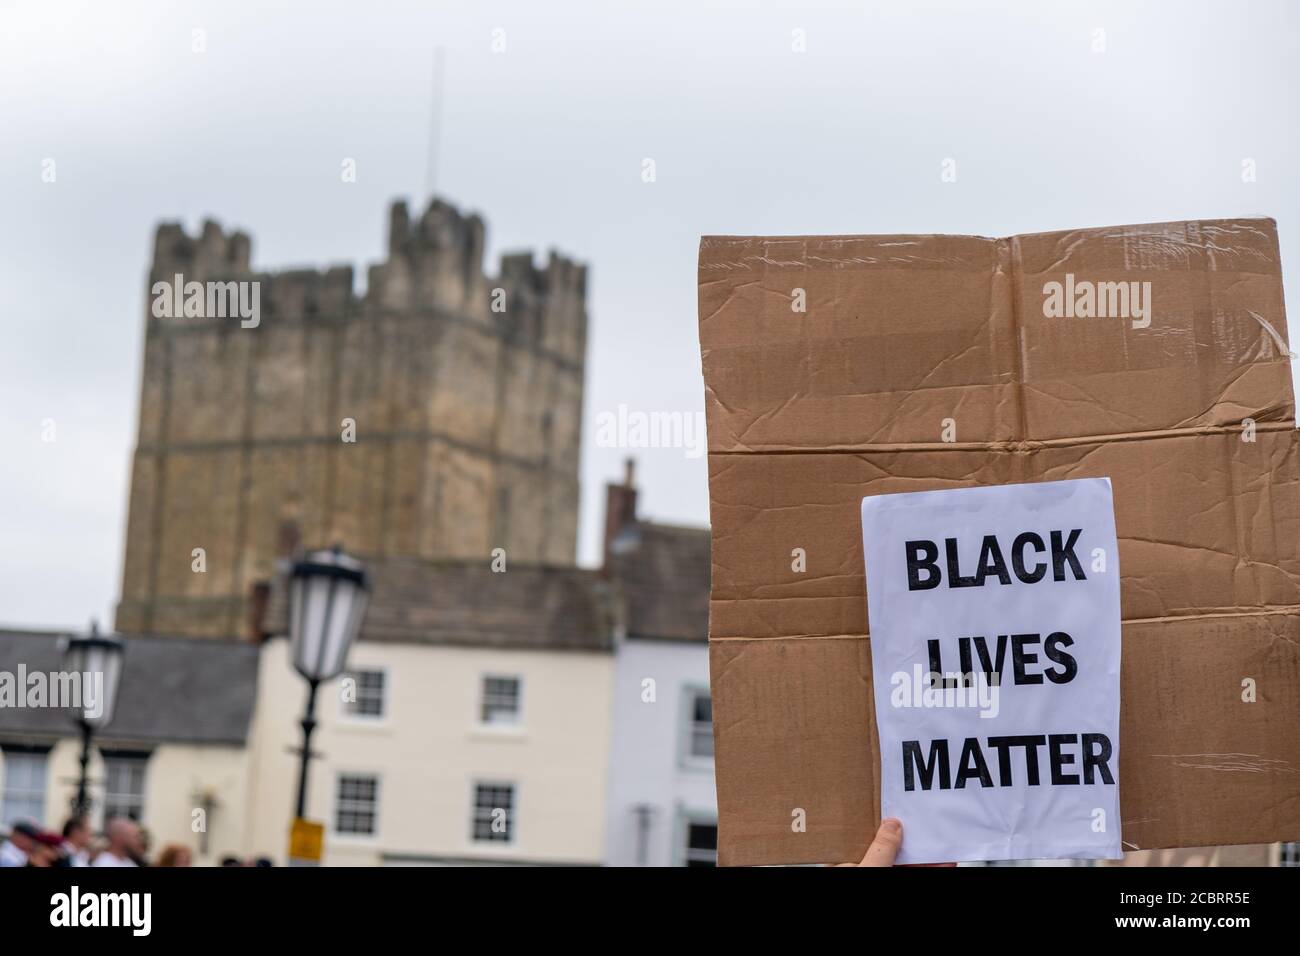 Richmond, North Yorkshire, UK - June 14, 2020: A Black Lives Matter sign held up in front of Richmond Castle at a protest in Richmond, North Yorkshire Stock Photo